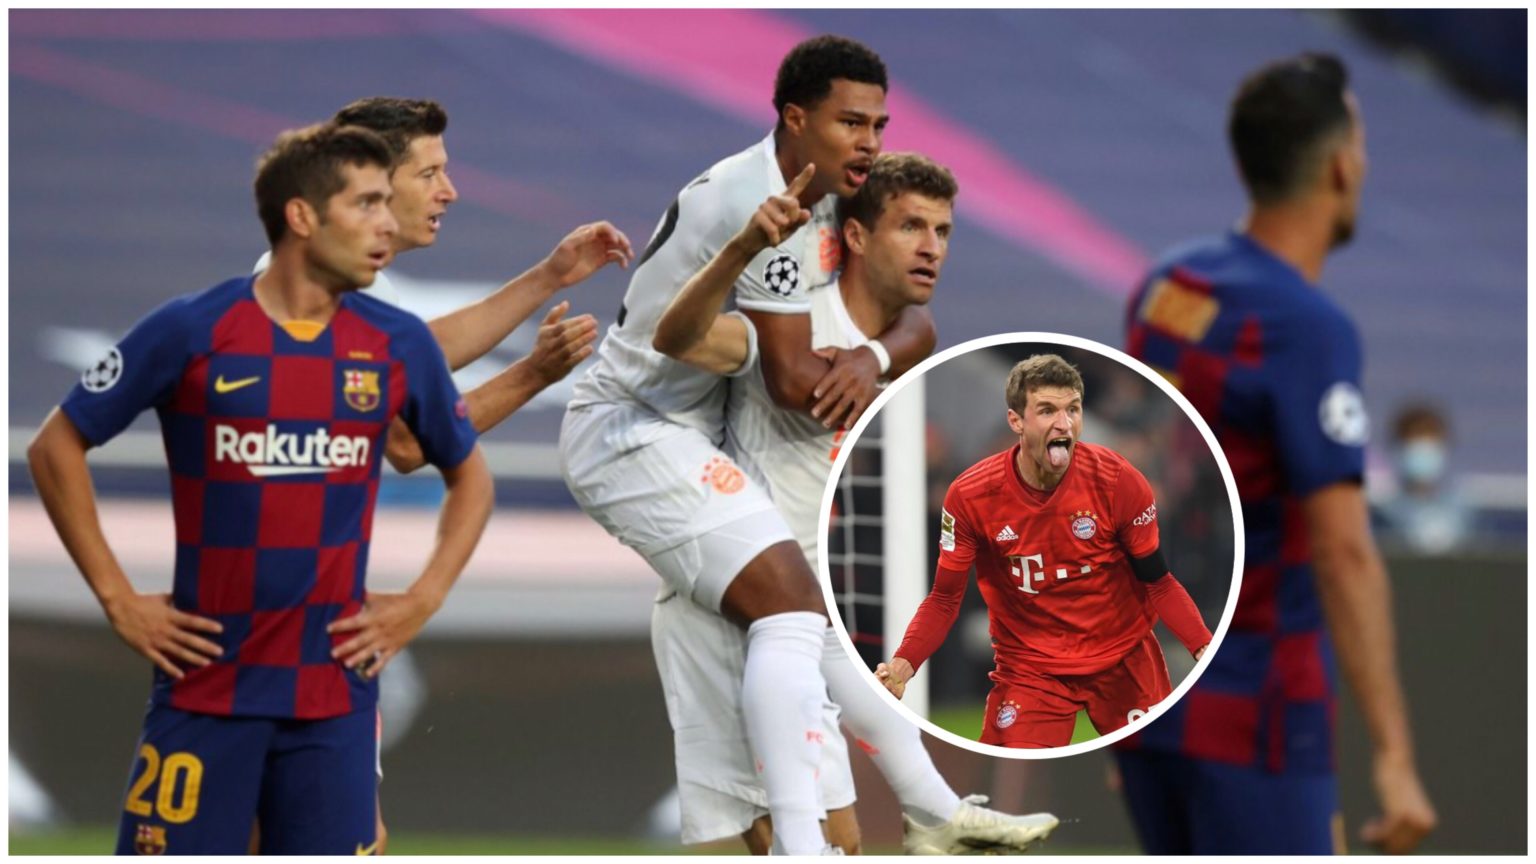 Thomas Muller Vows To Dump Barcelona Into Europa League After What Happened At The Ballon d’Or